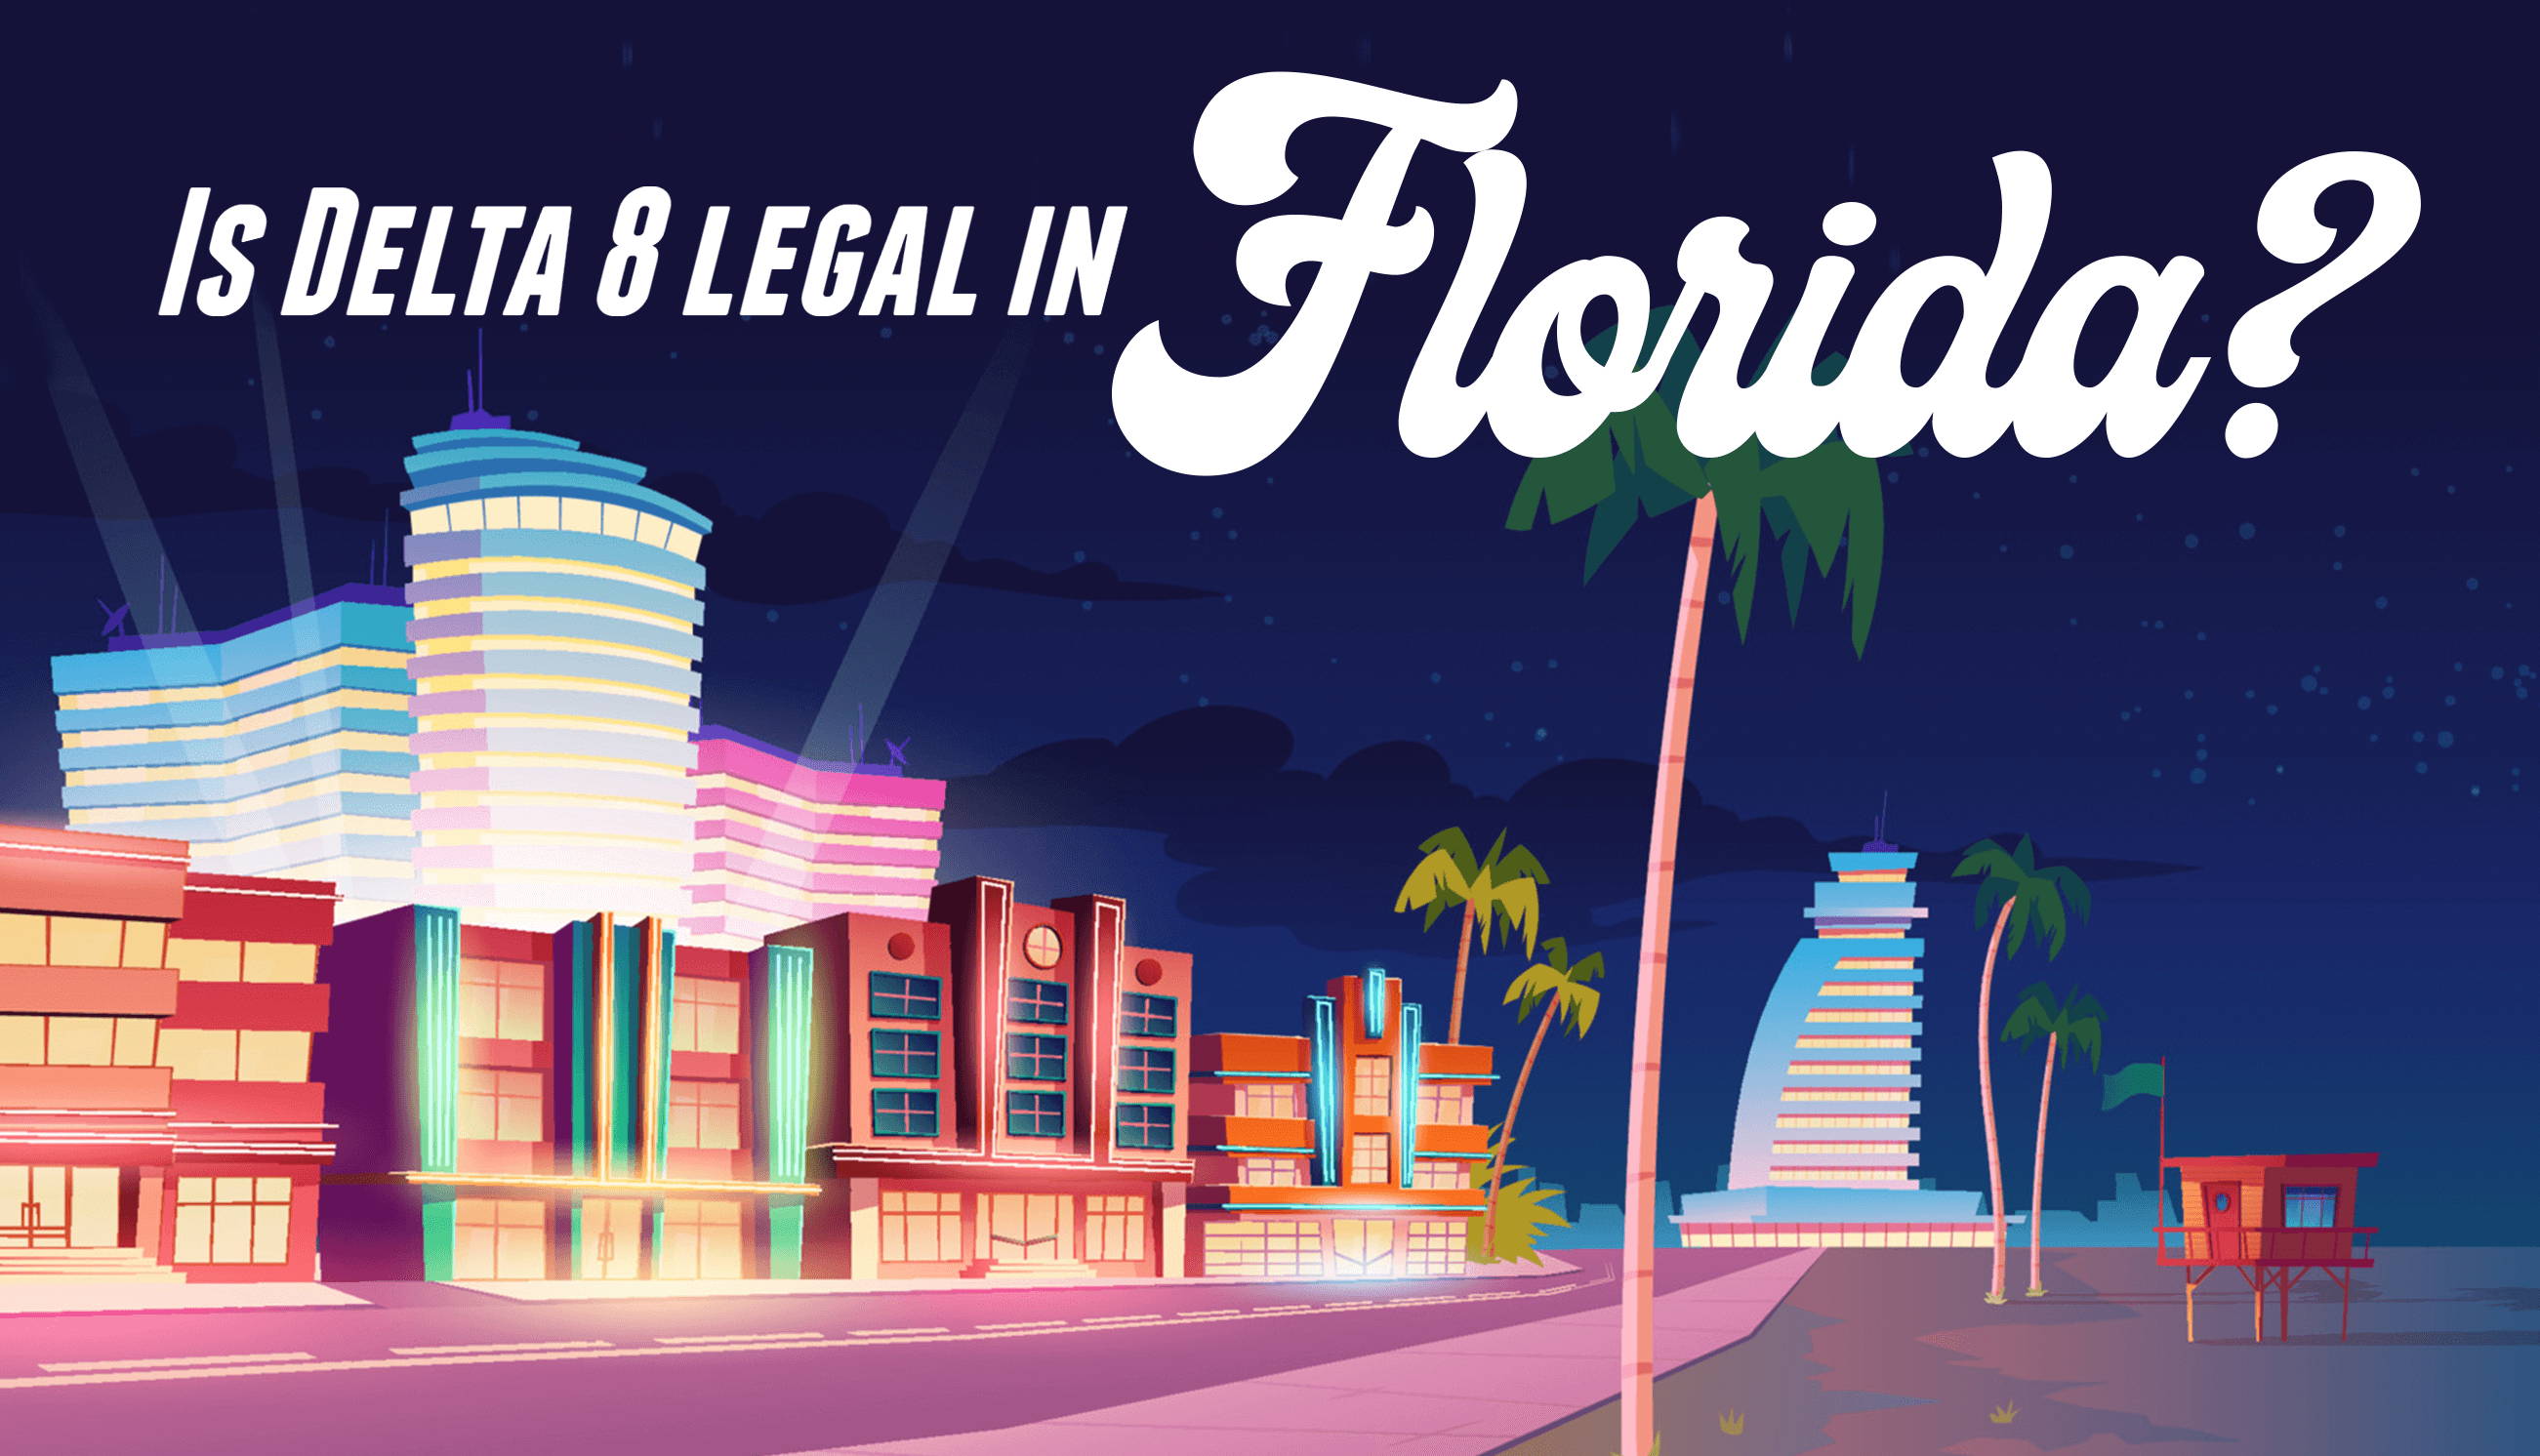 Is Delta 8 Legal in Florida